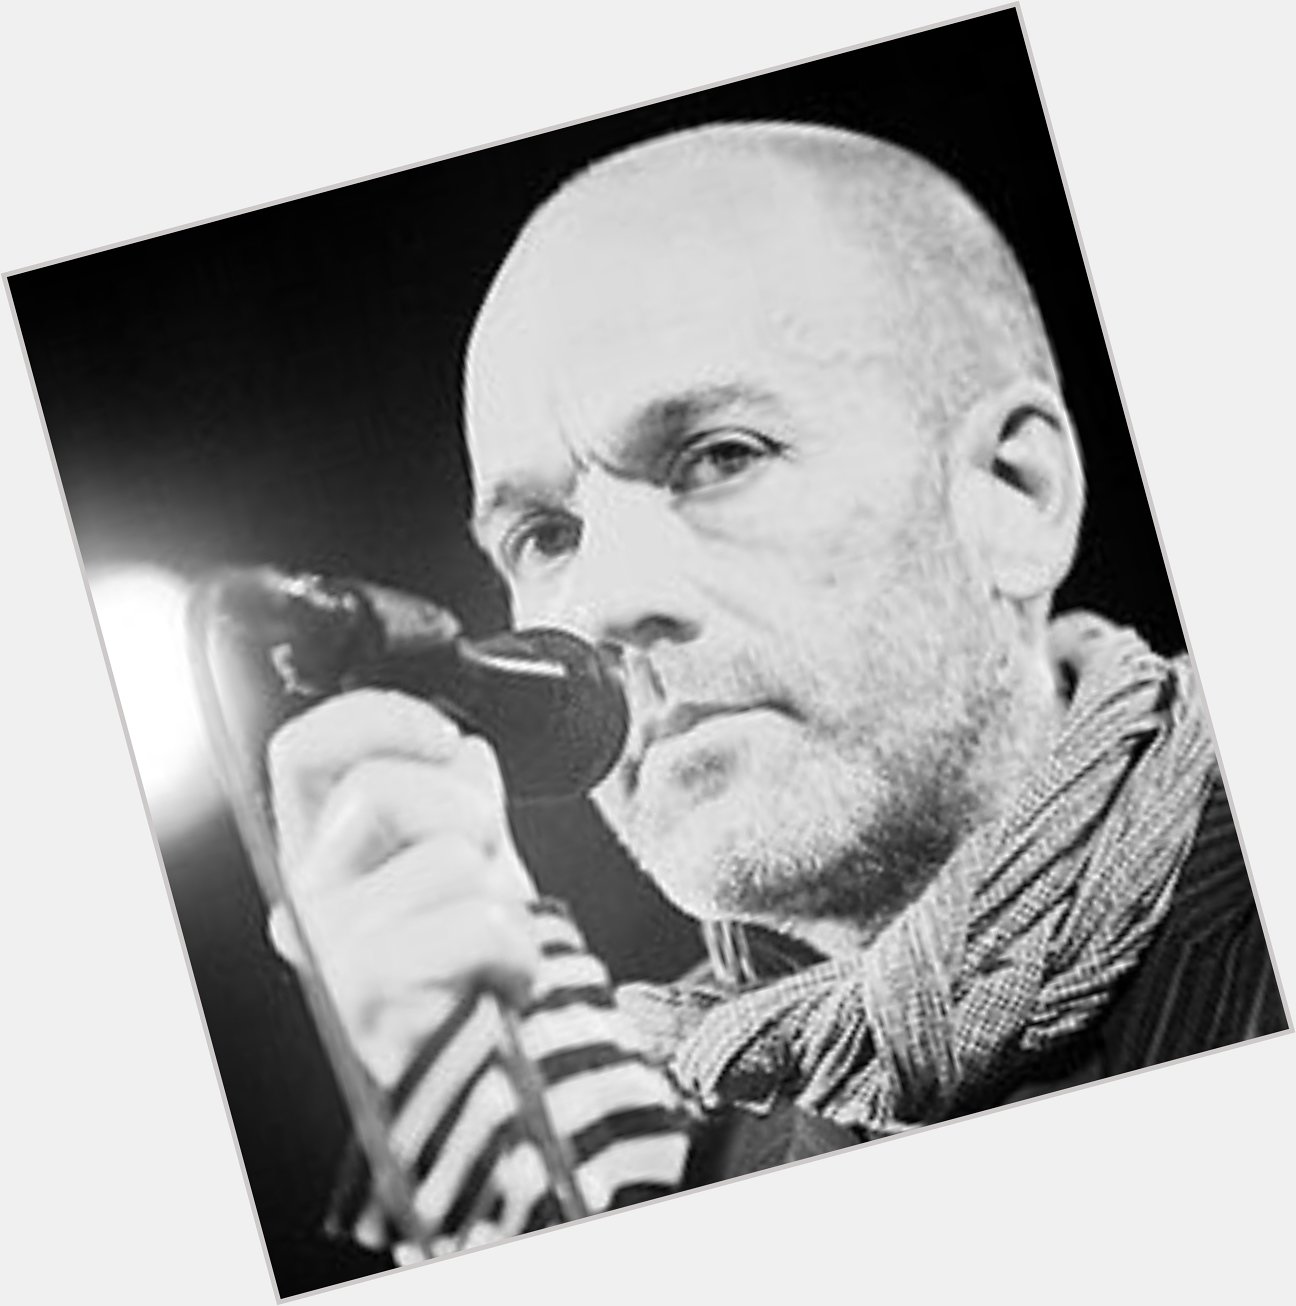 Happy birthday to R.E.M. frontman Michael Stipe. Hell of a 